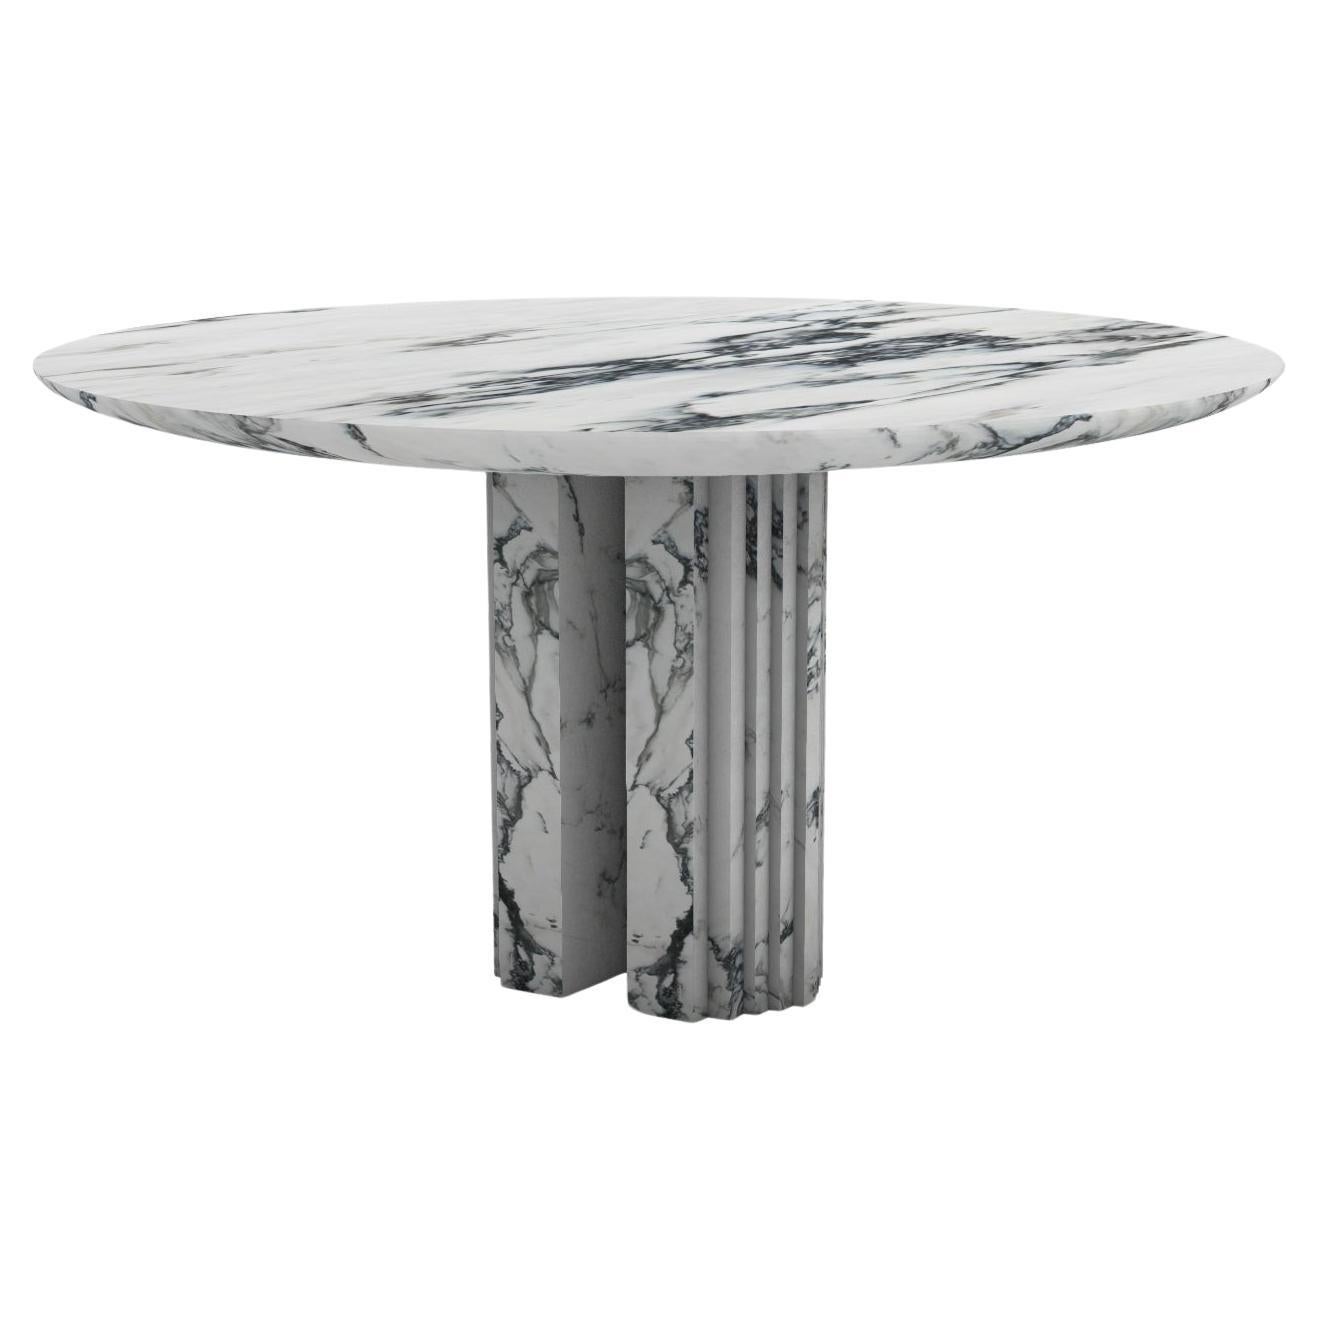 Dining table 0024c in Paonazzo Marble by artist Desia Ava